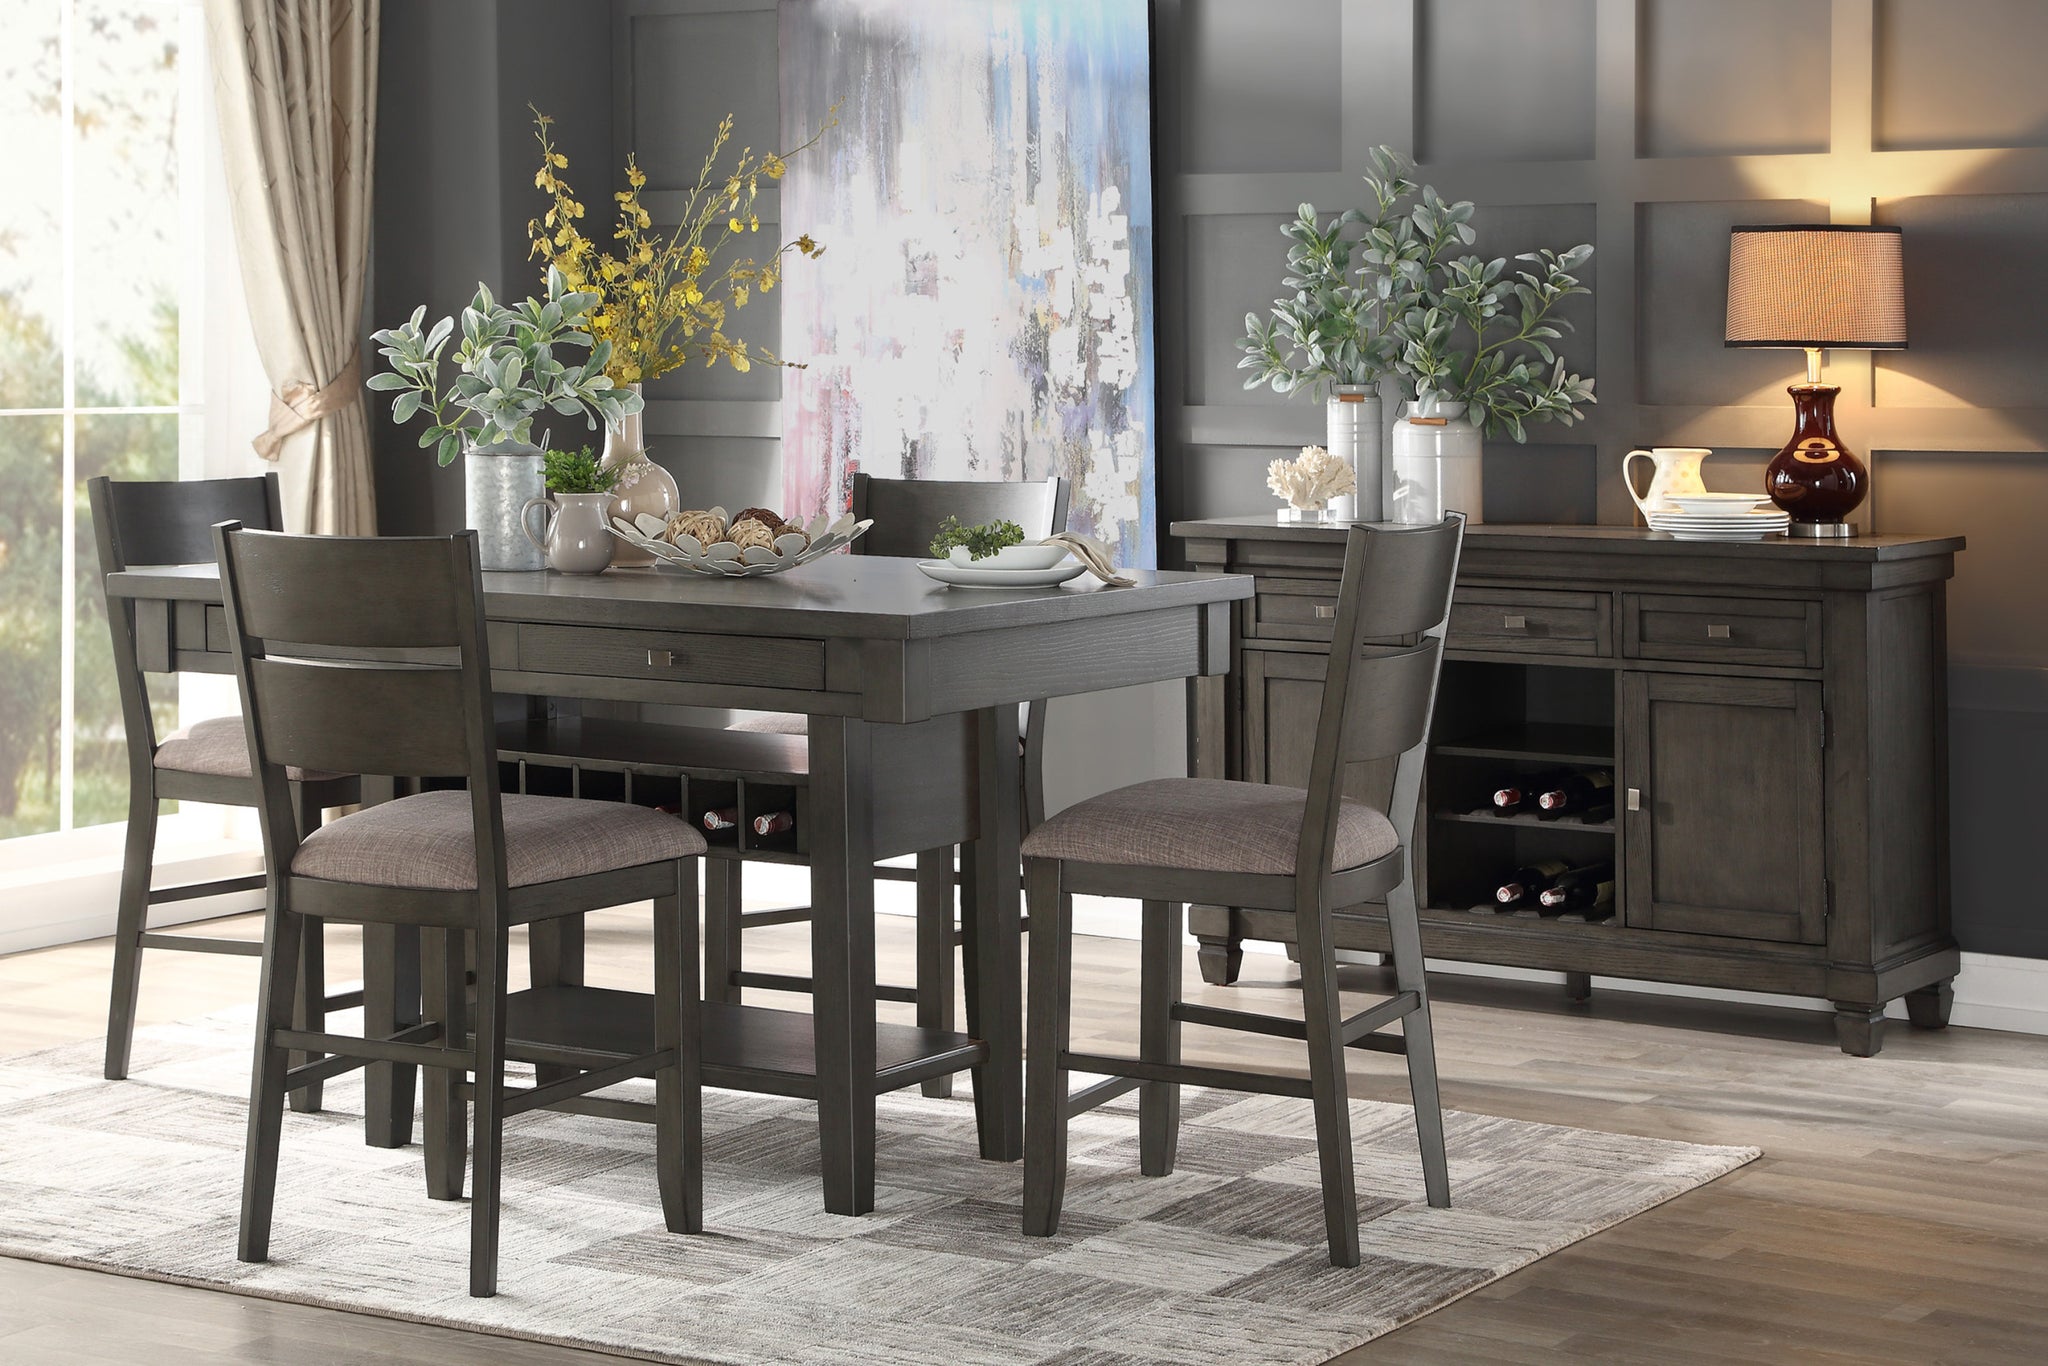 Counter Height 5pc Dining Set Gray Finish Dining Table wood-wood-gray-seats 4-wood-dining